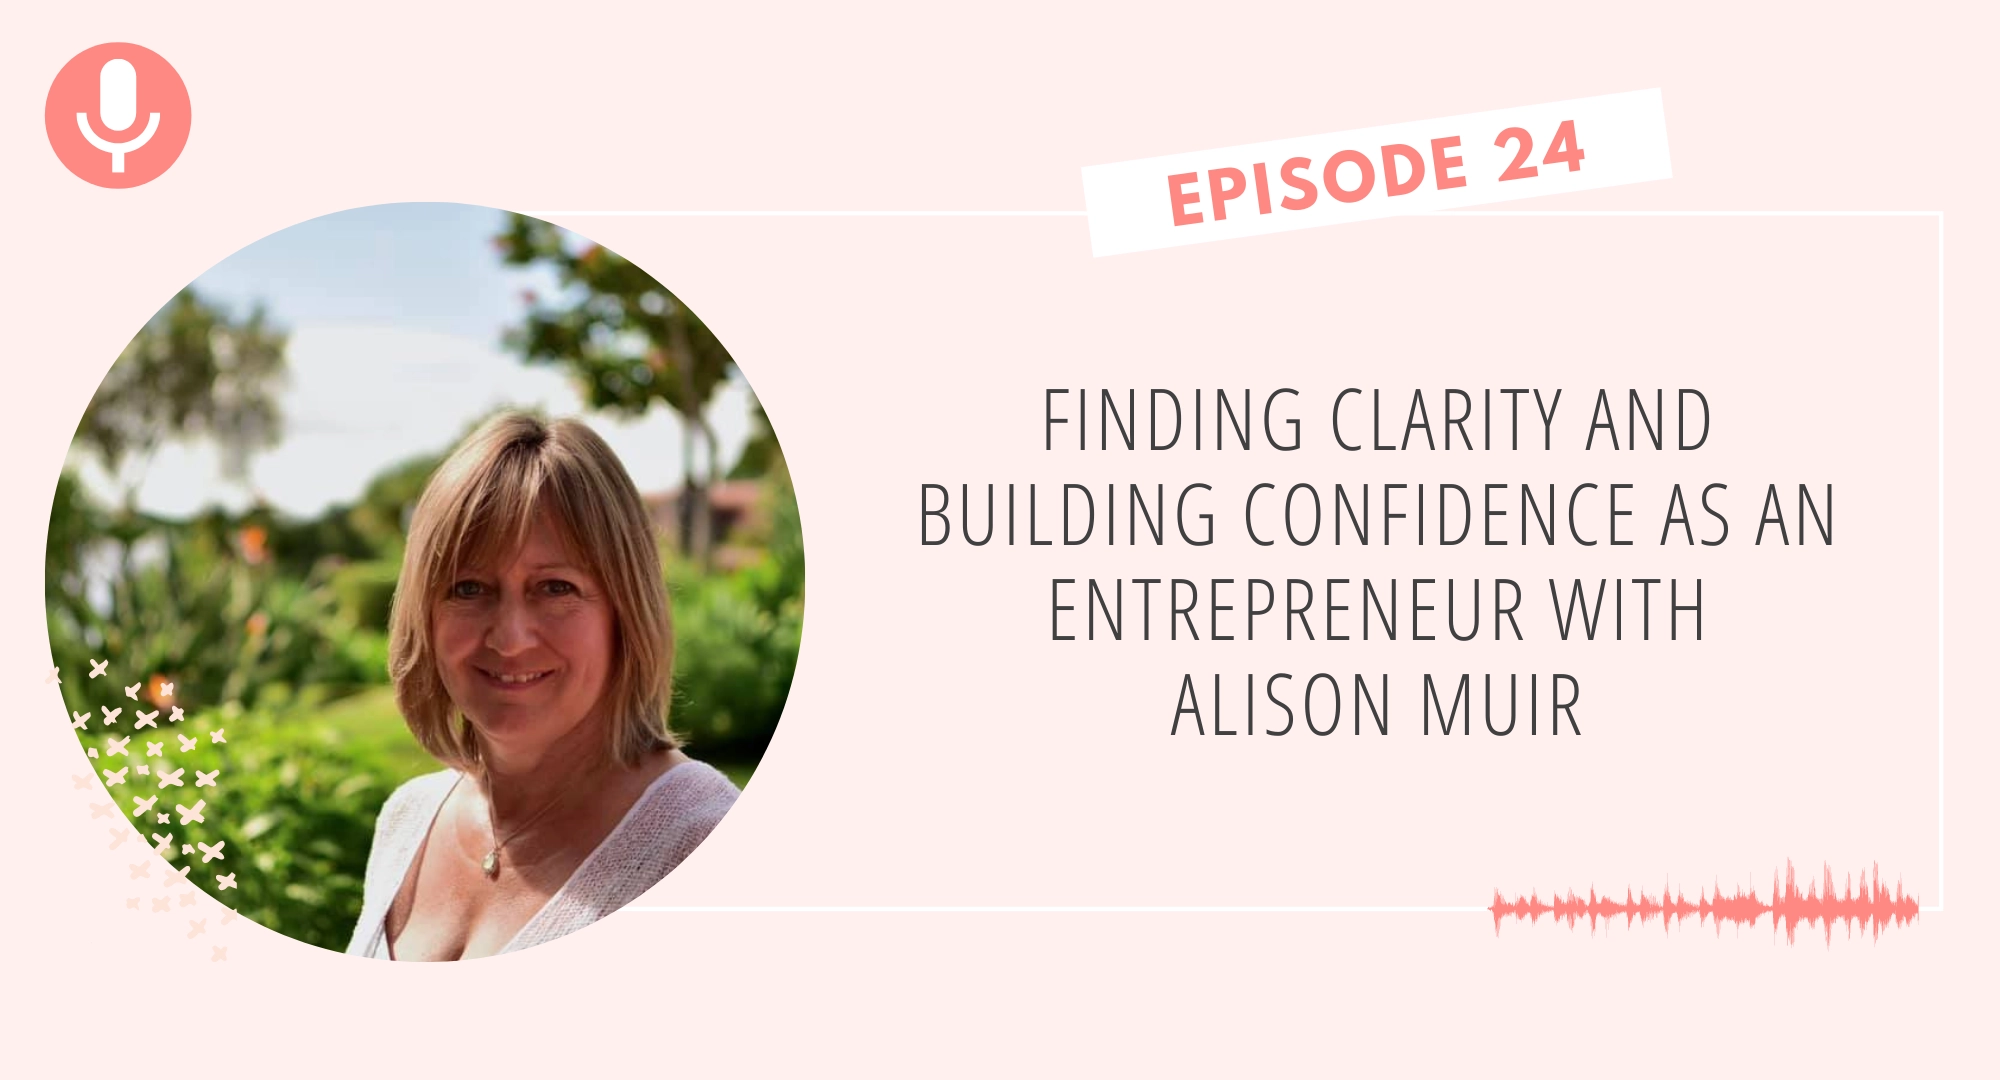 Finding Clarity & Building Confidence as an Entrepreneur with Alison Muir